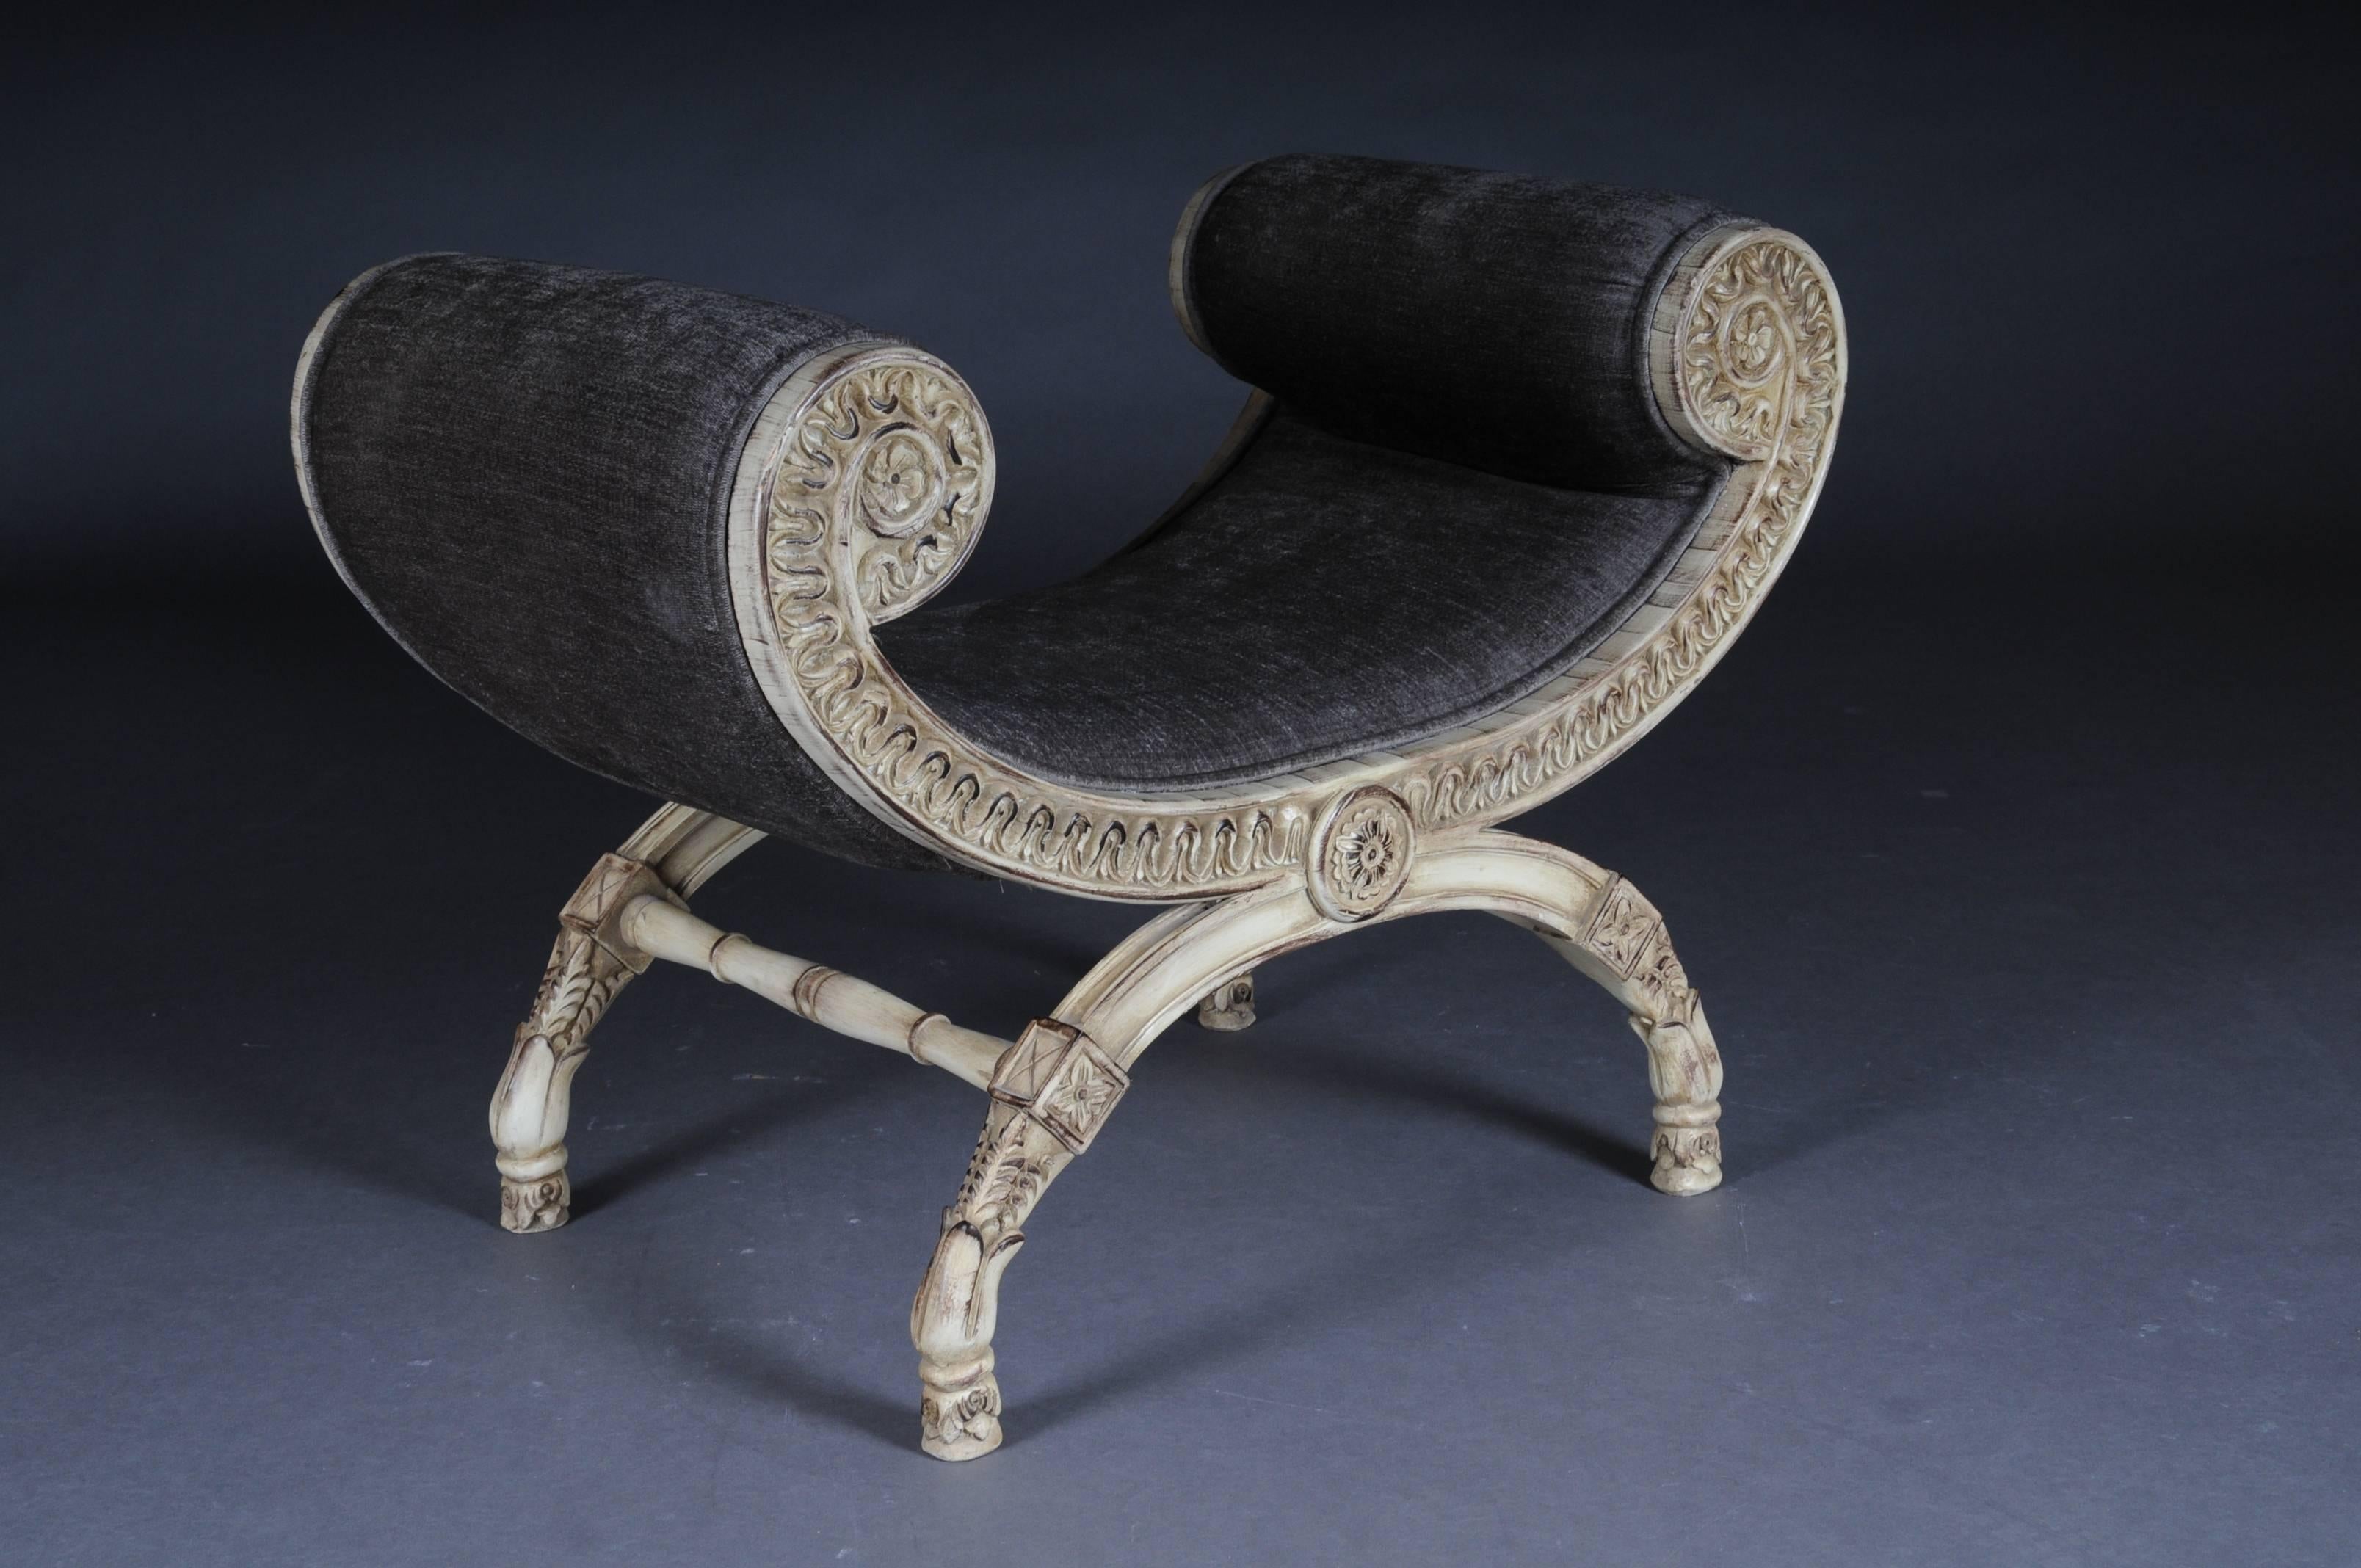 Solid beechwood, finely carved and set. Armrests ending in scrolled volutes. Semicircular frame on four scissor-shaped legs. Below connected by appropriately curly, strongly profiled webs. The seat is finished with a historical, Classic upholstery.